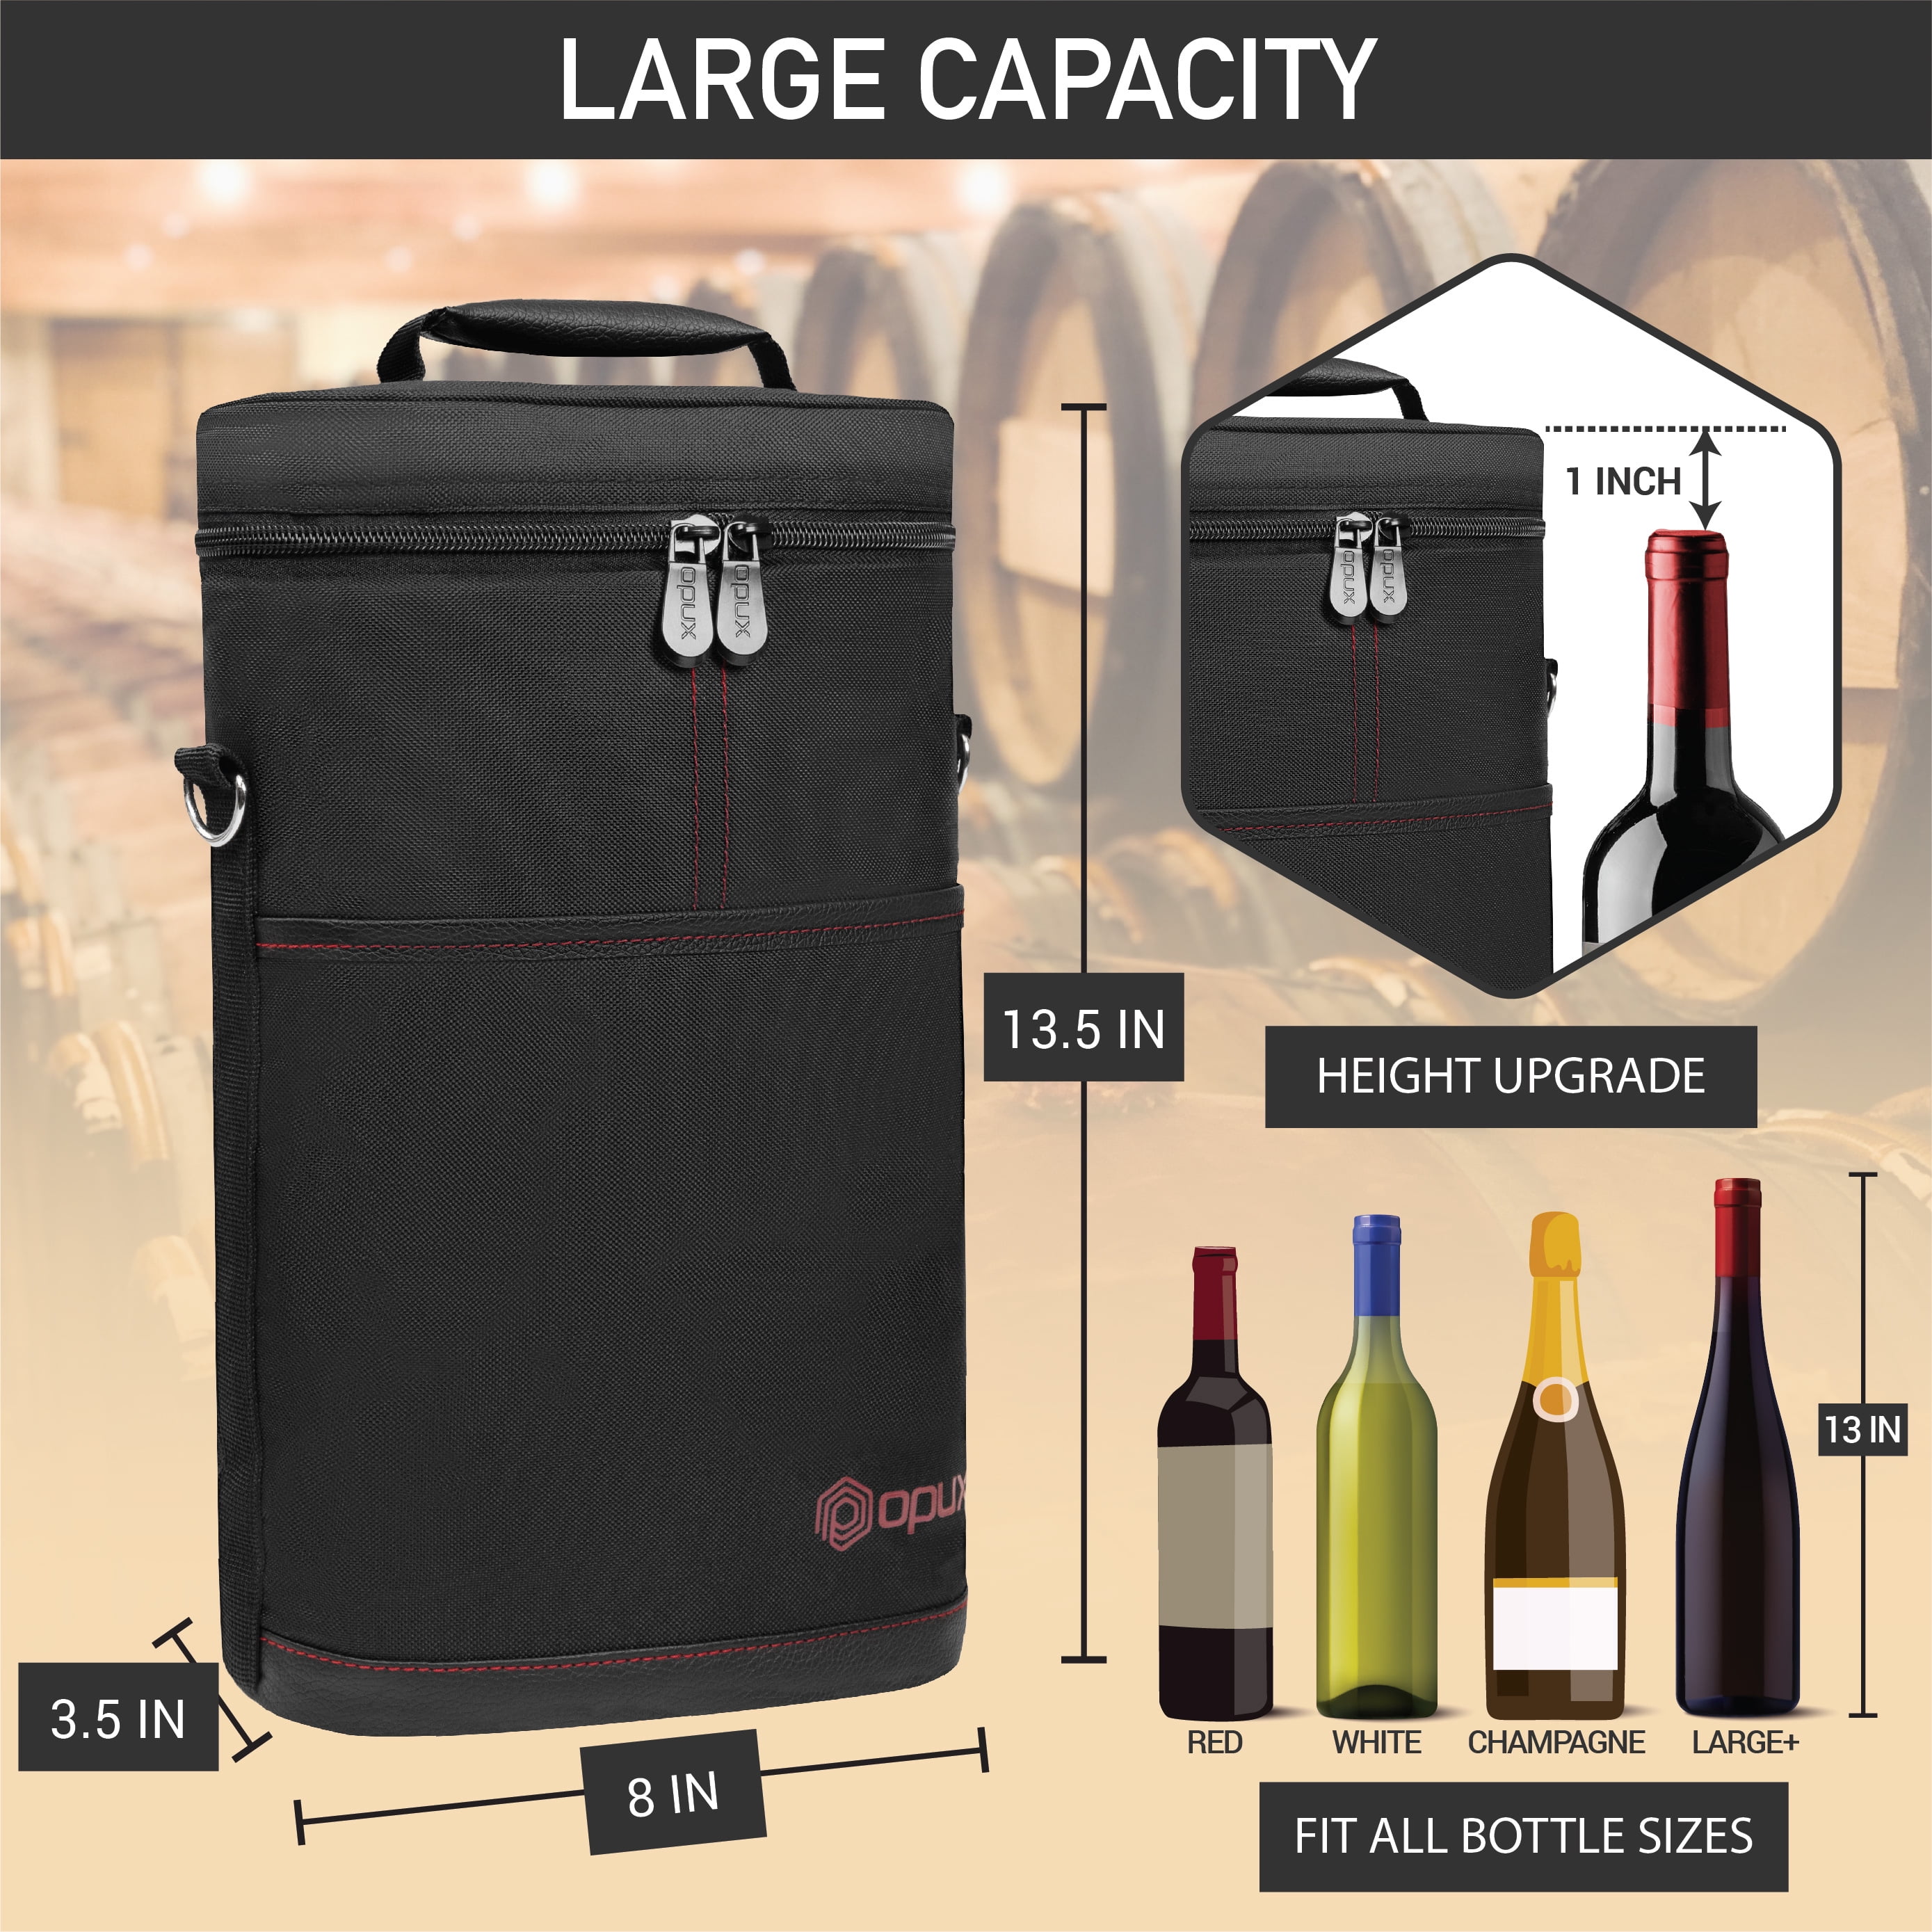 OPUX 2 Bottle Wine Carrier Tote, Insulated Leakproof Wine Cooler